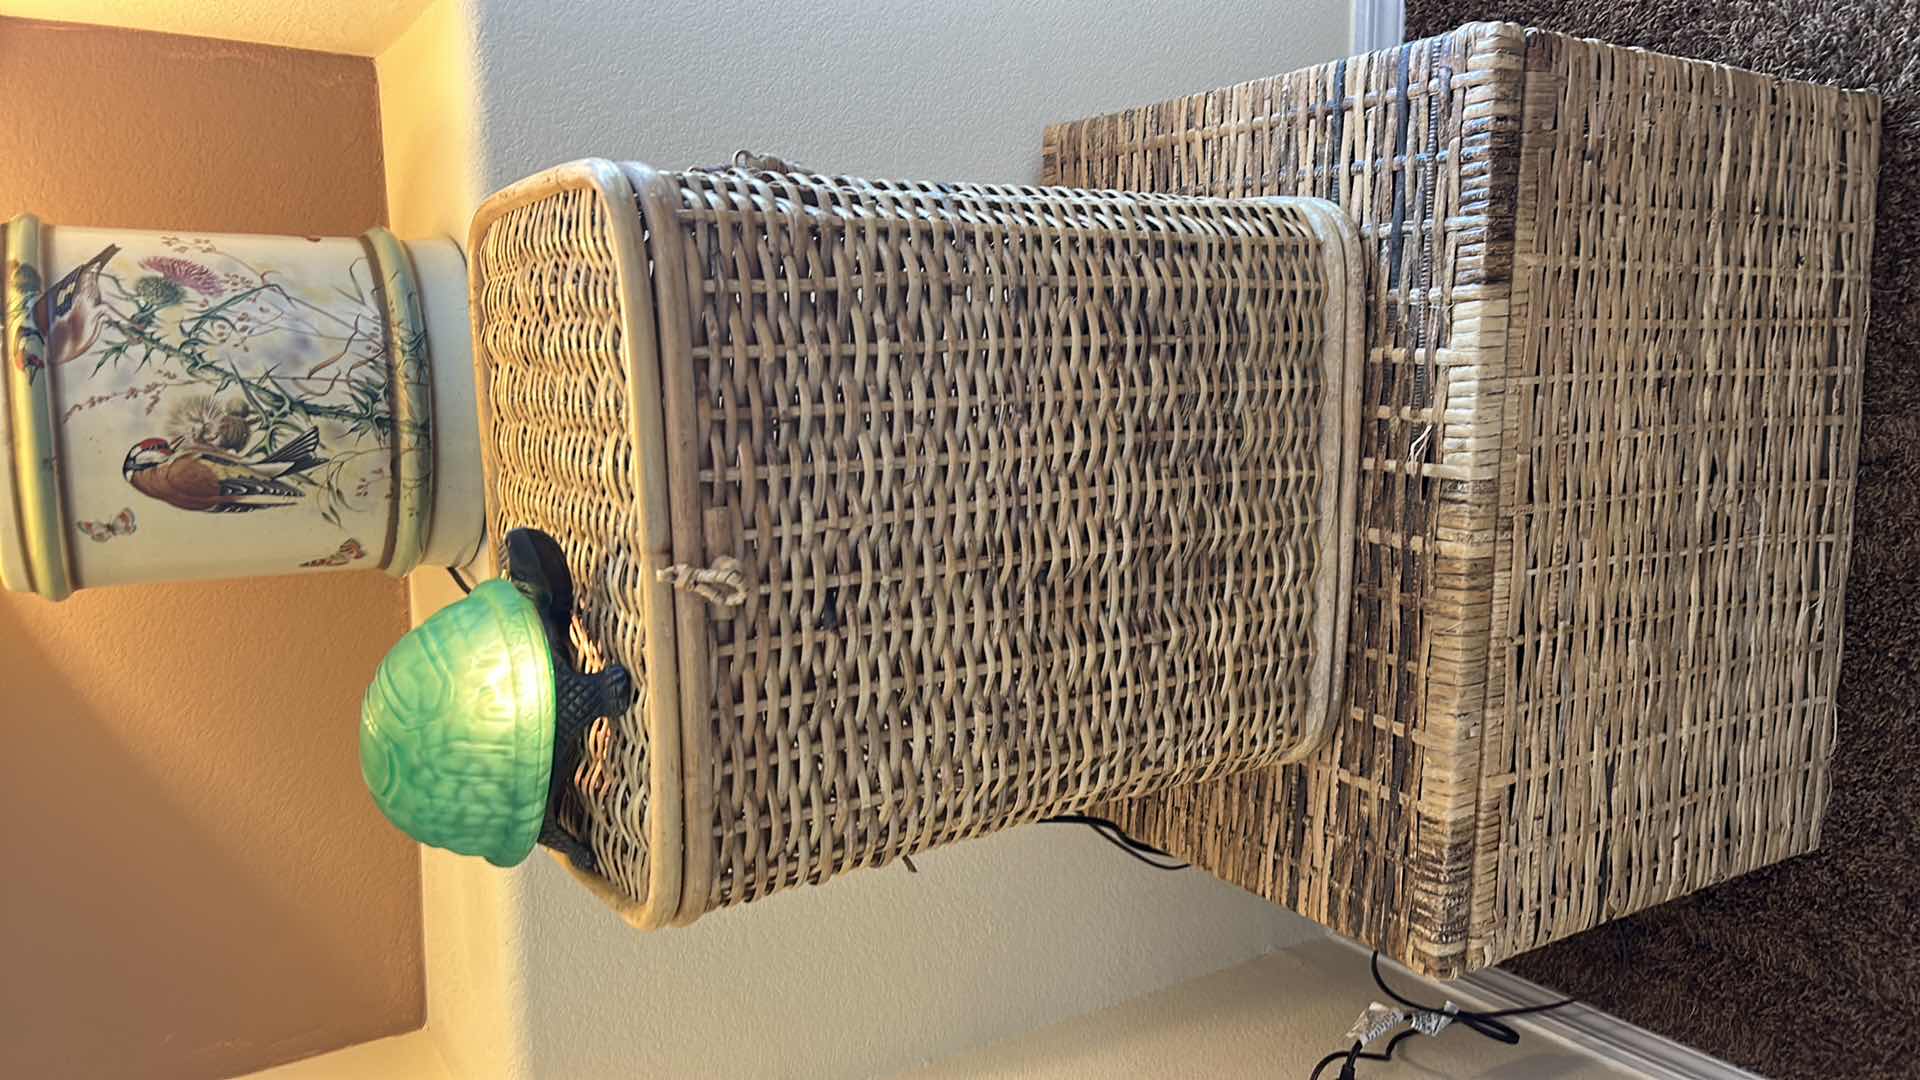 Photo 5 of TWO WICKER BASKETS AND TWO LAMPS (LARGE WICKER STORAGE 22 1/2 x 17 1/2 x 18”